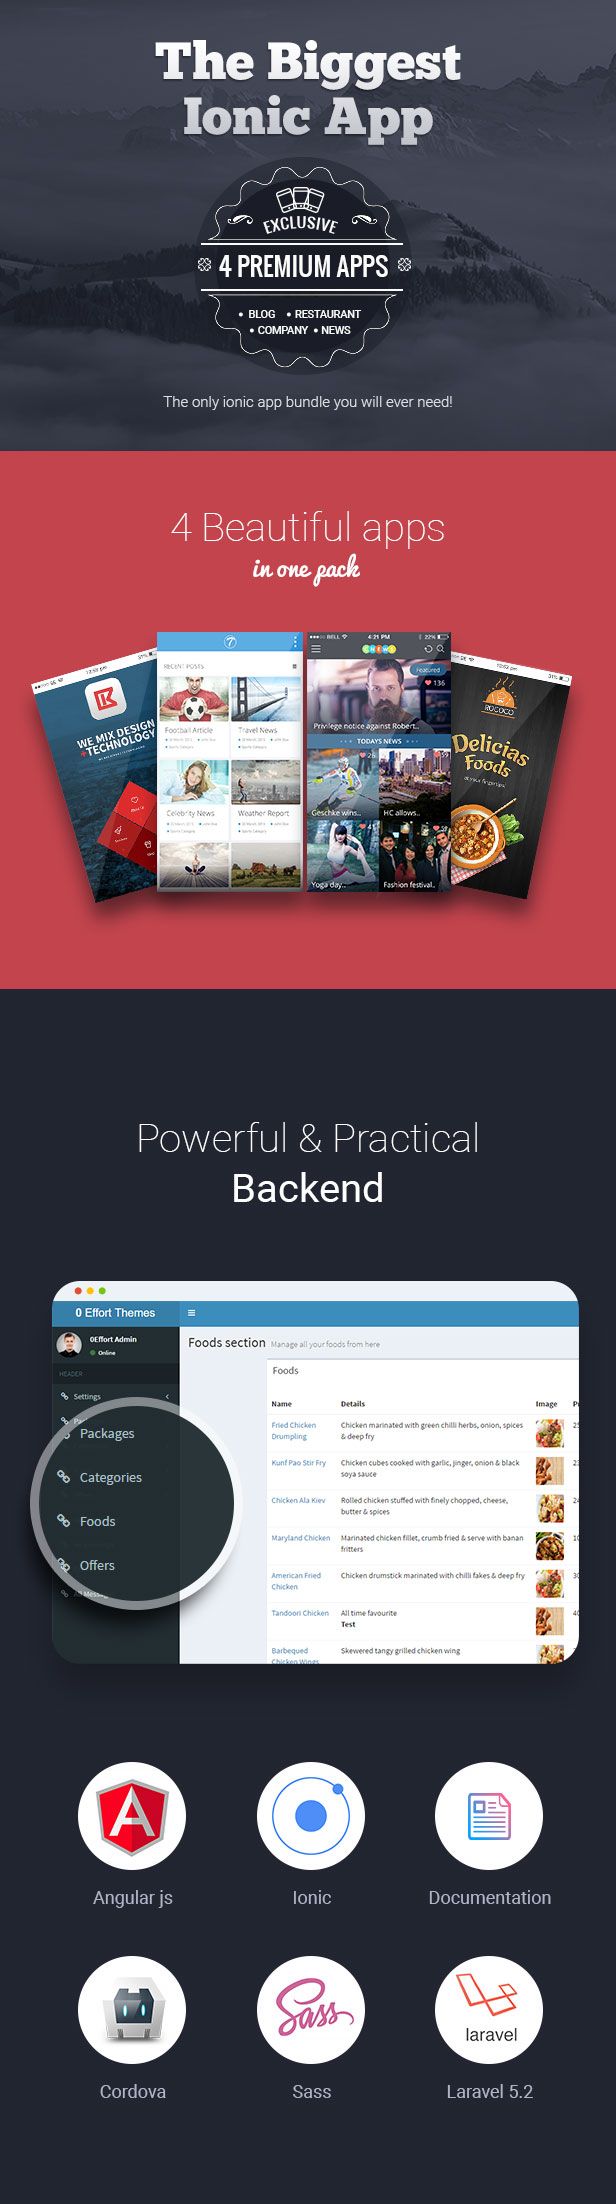 X App - Hand-crafted multiple ionic apps with Laravel backend - 2